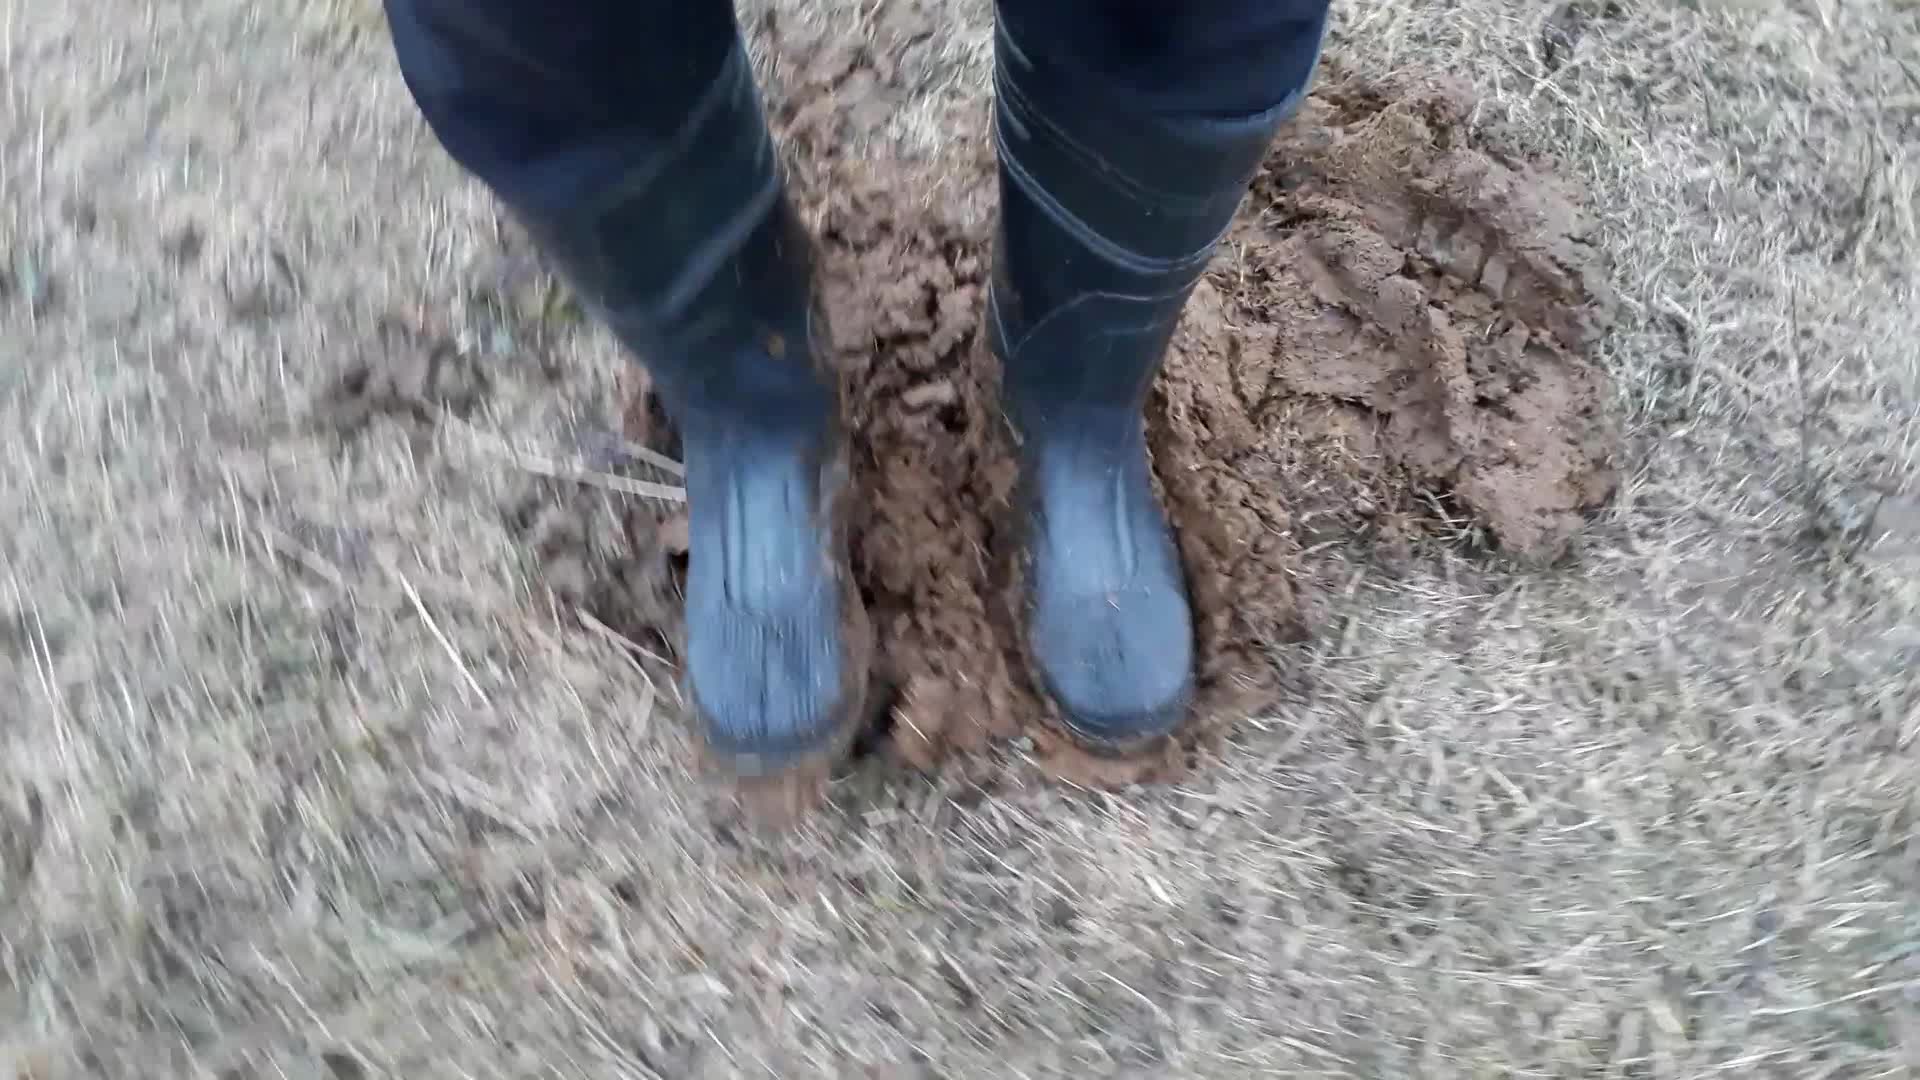 Rubber boots vs cowshit - video 12